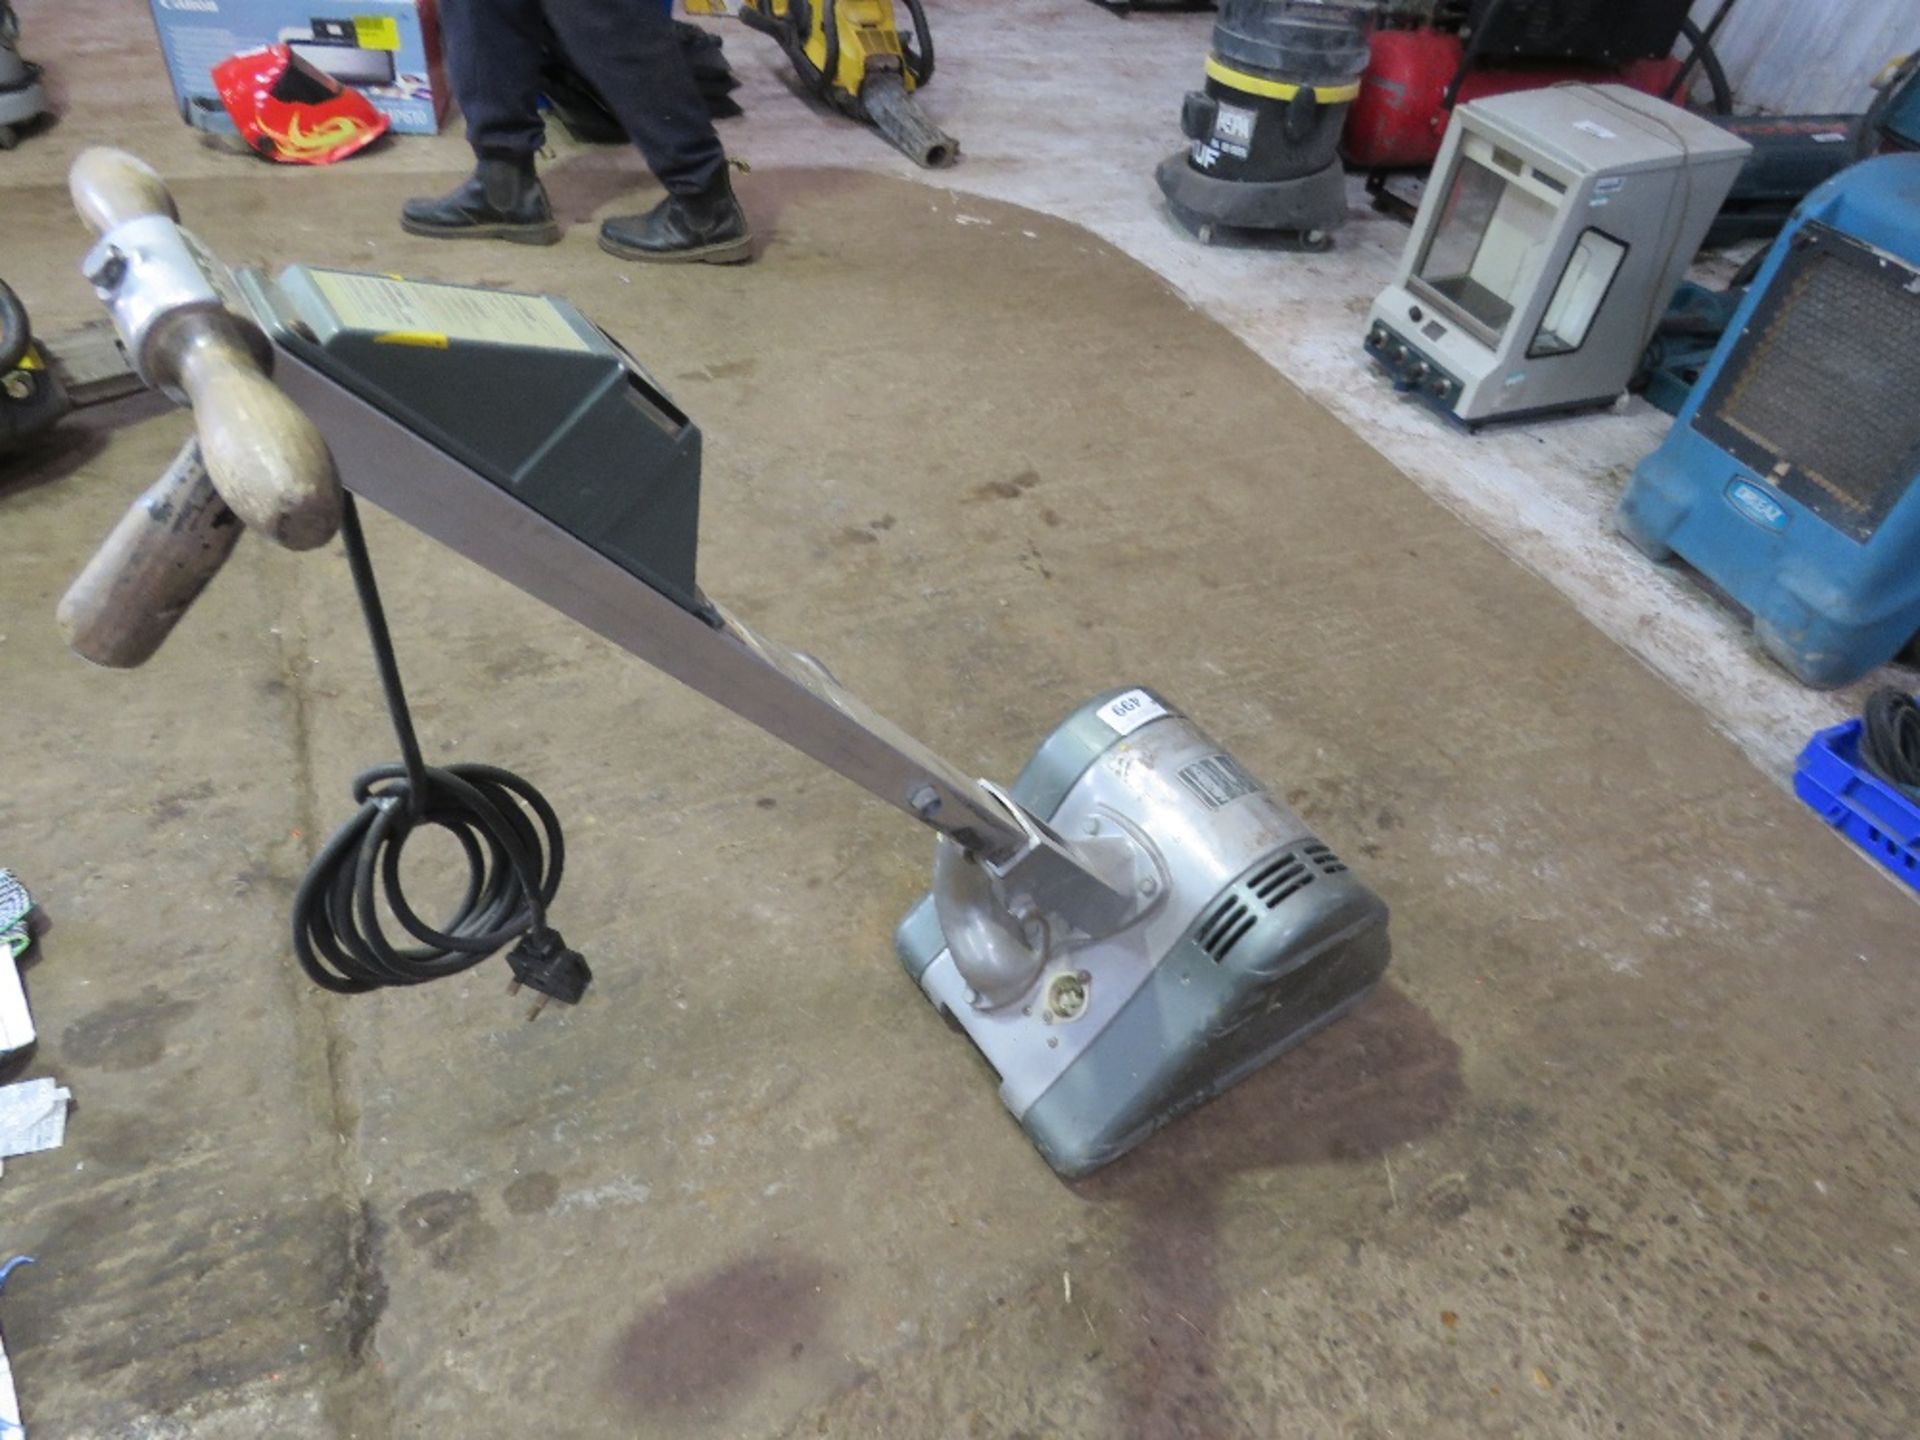 HIRETECH 240VOLT FLOOR SANDER.....THIS LOT IS SOLD UNDER THE AUCTIONEERS MARGIN SCHEME, THEREFORE NO - Image 3 of 3